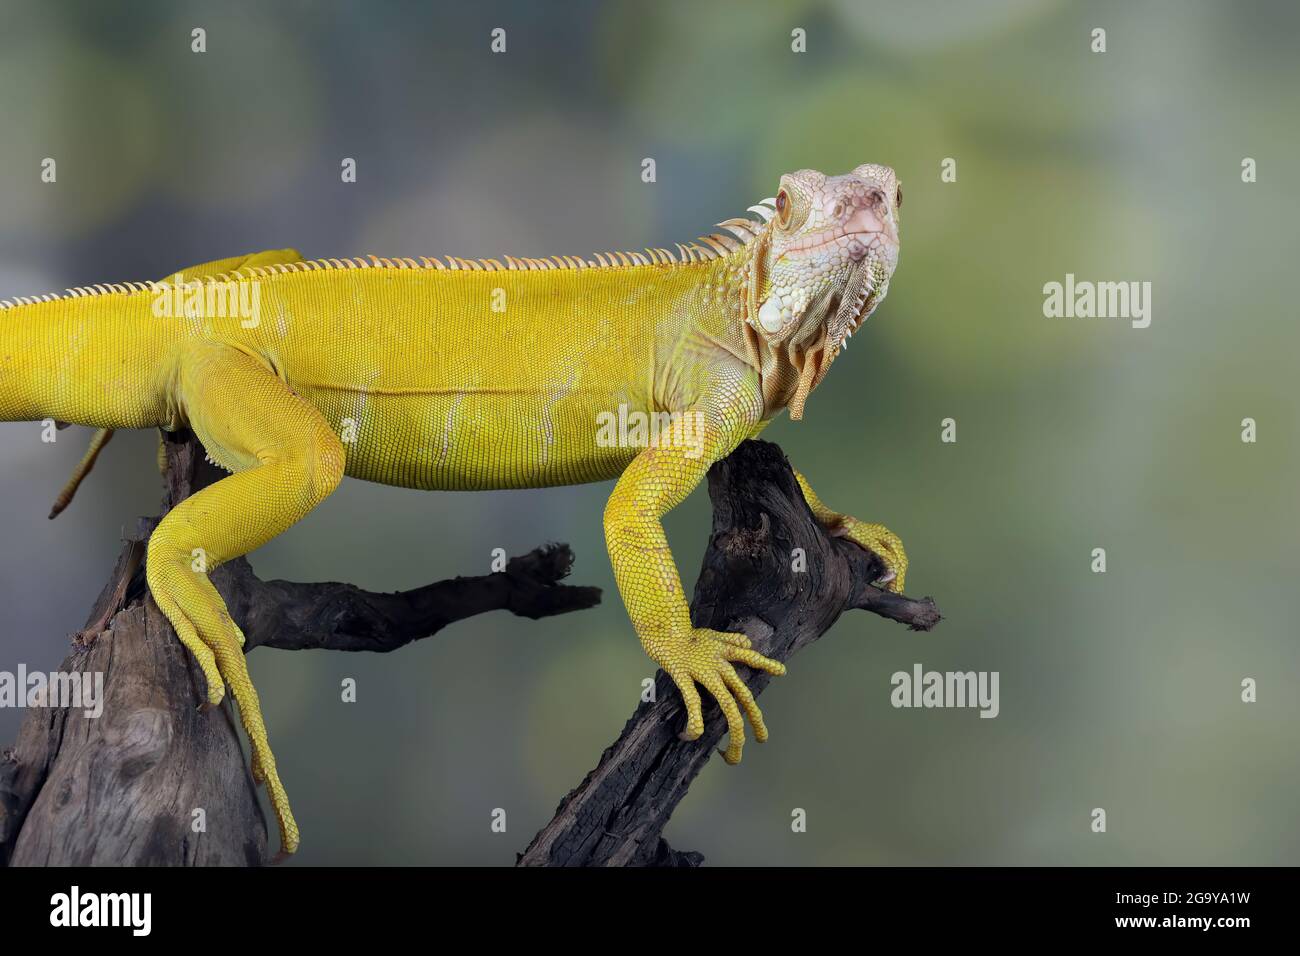 Close-up of an Albino iguana on a branch, Indonesia Stock Photo